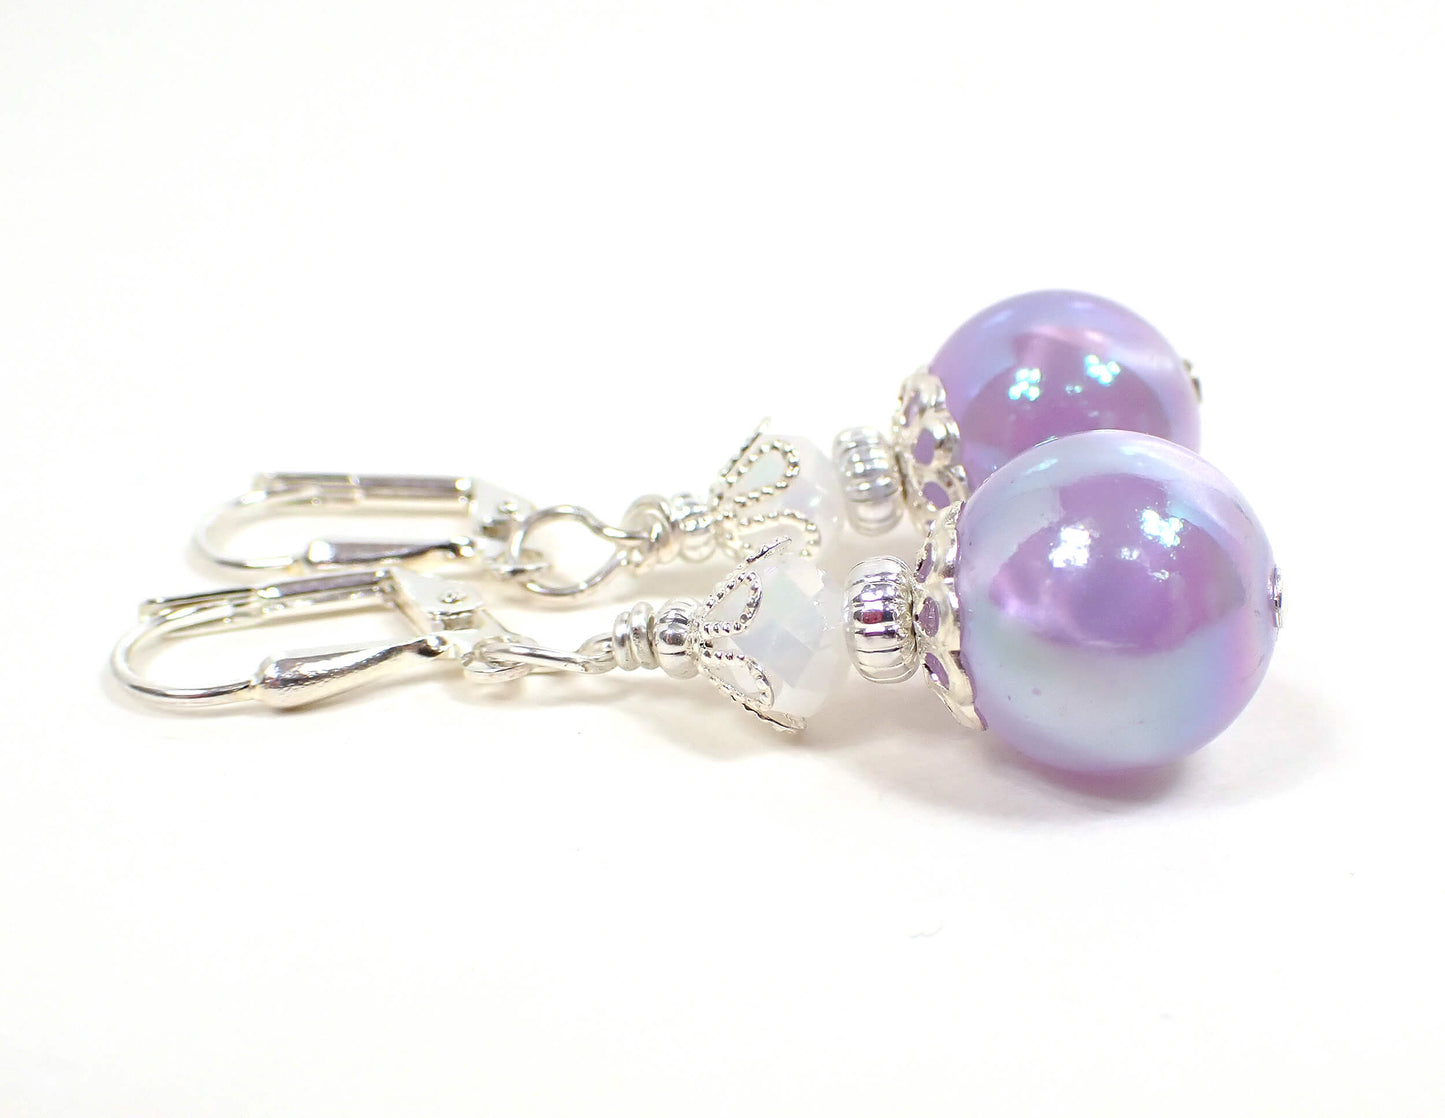 Handmade Pearly Iridescent Purple Drop Earrings Silver Plated Hook Lever Back or Clip On